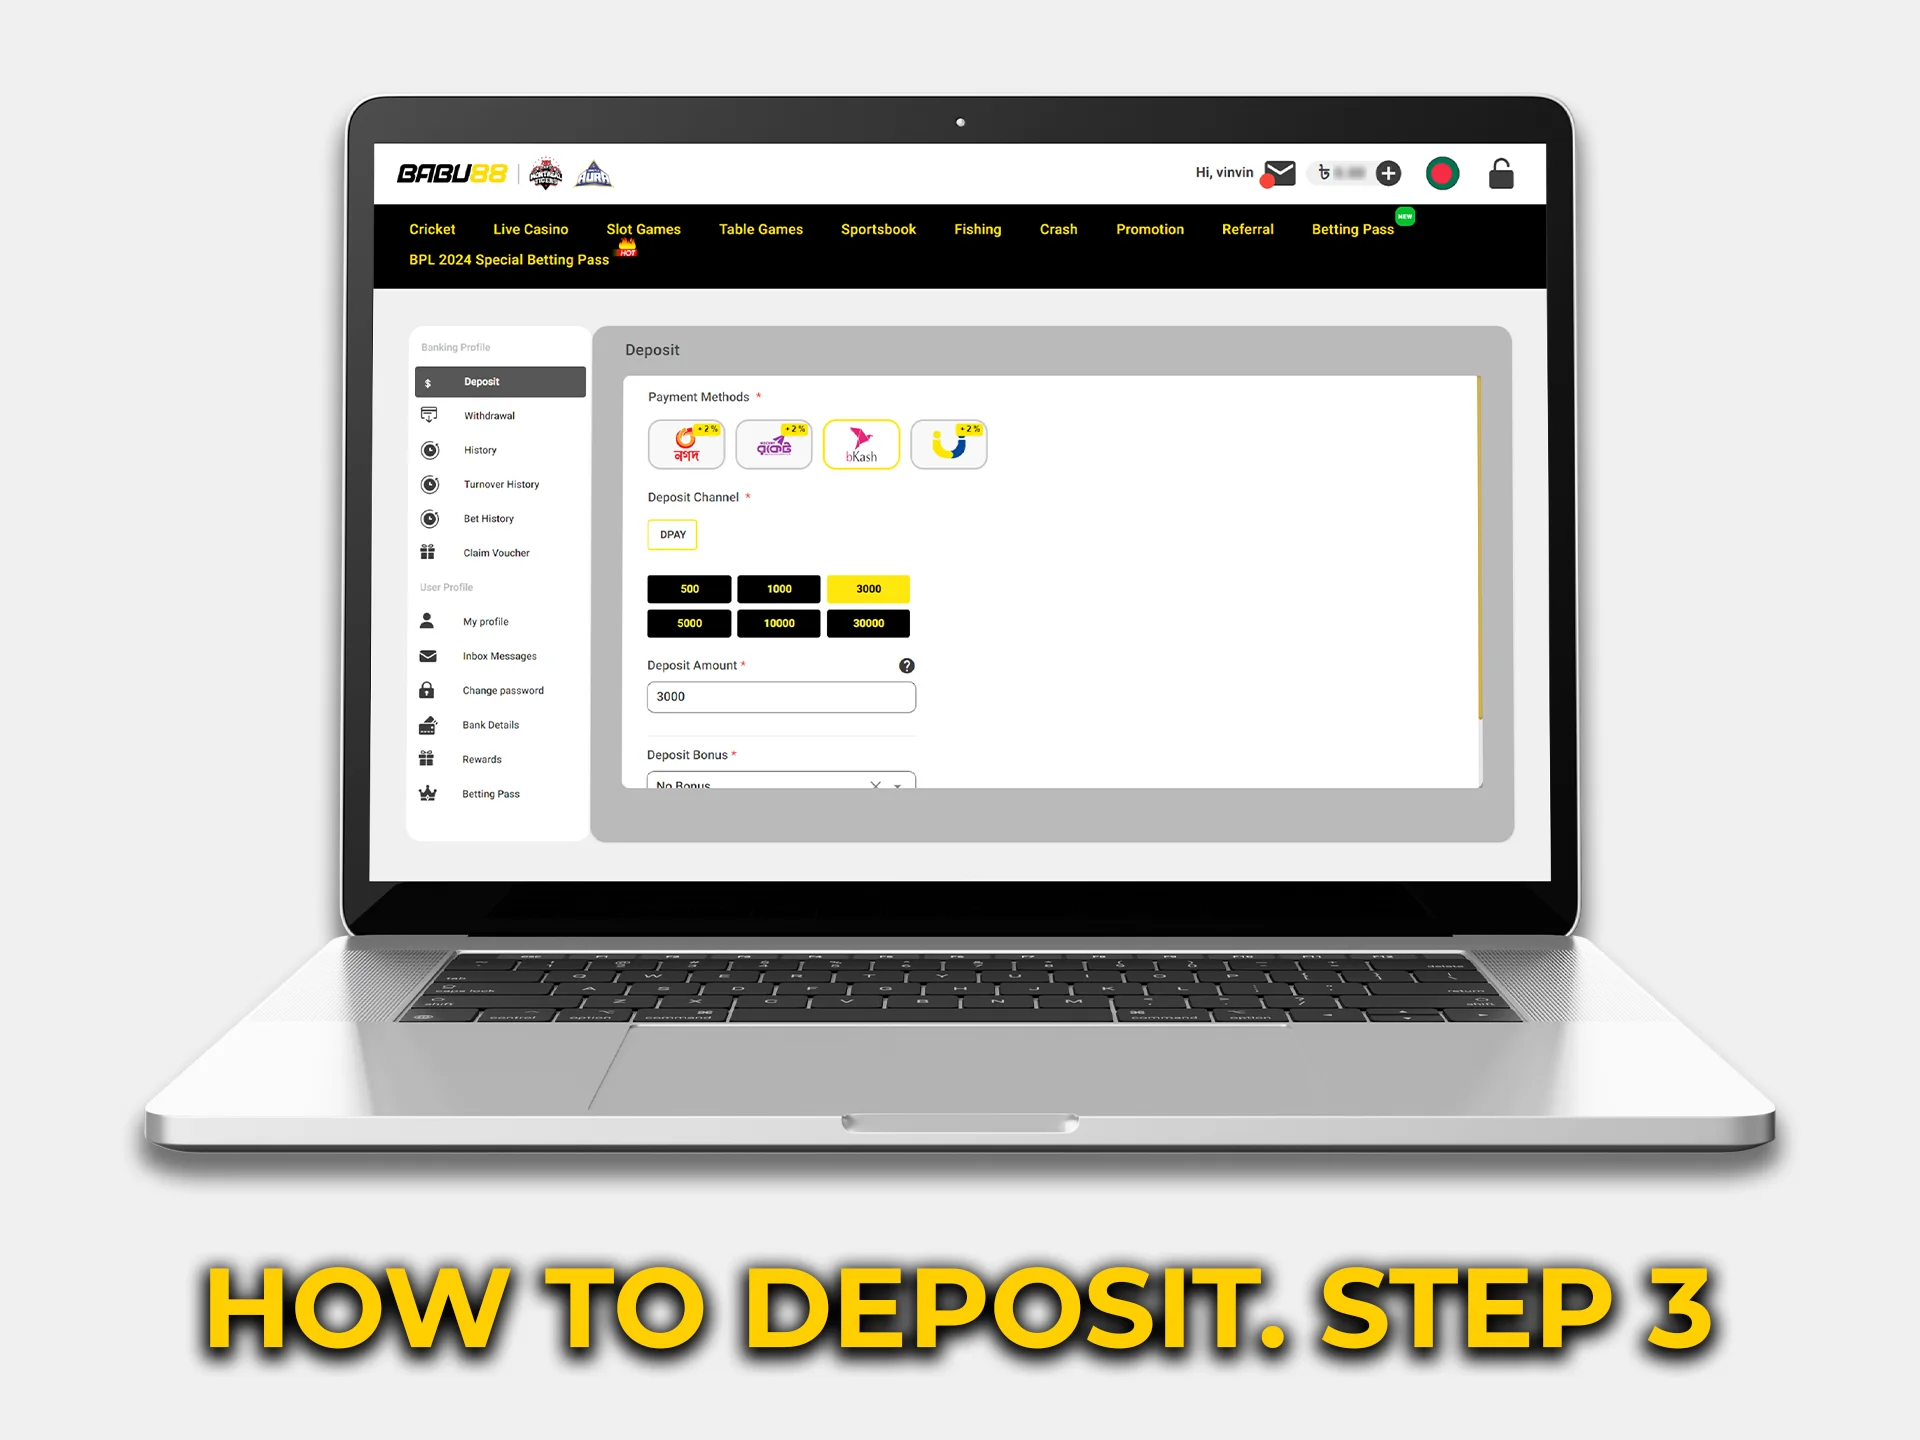 Select a convenient deposit method and enter the amount.